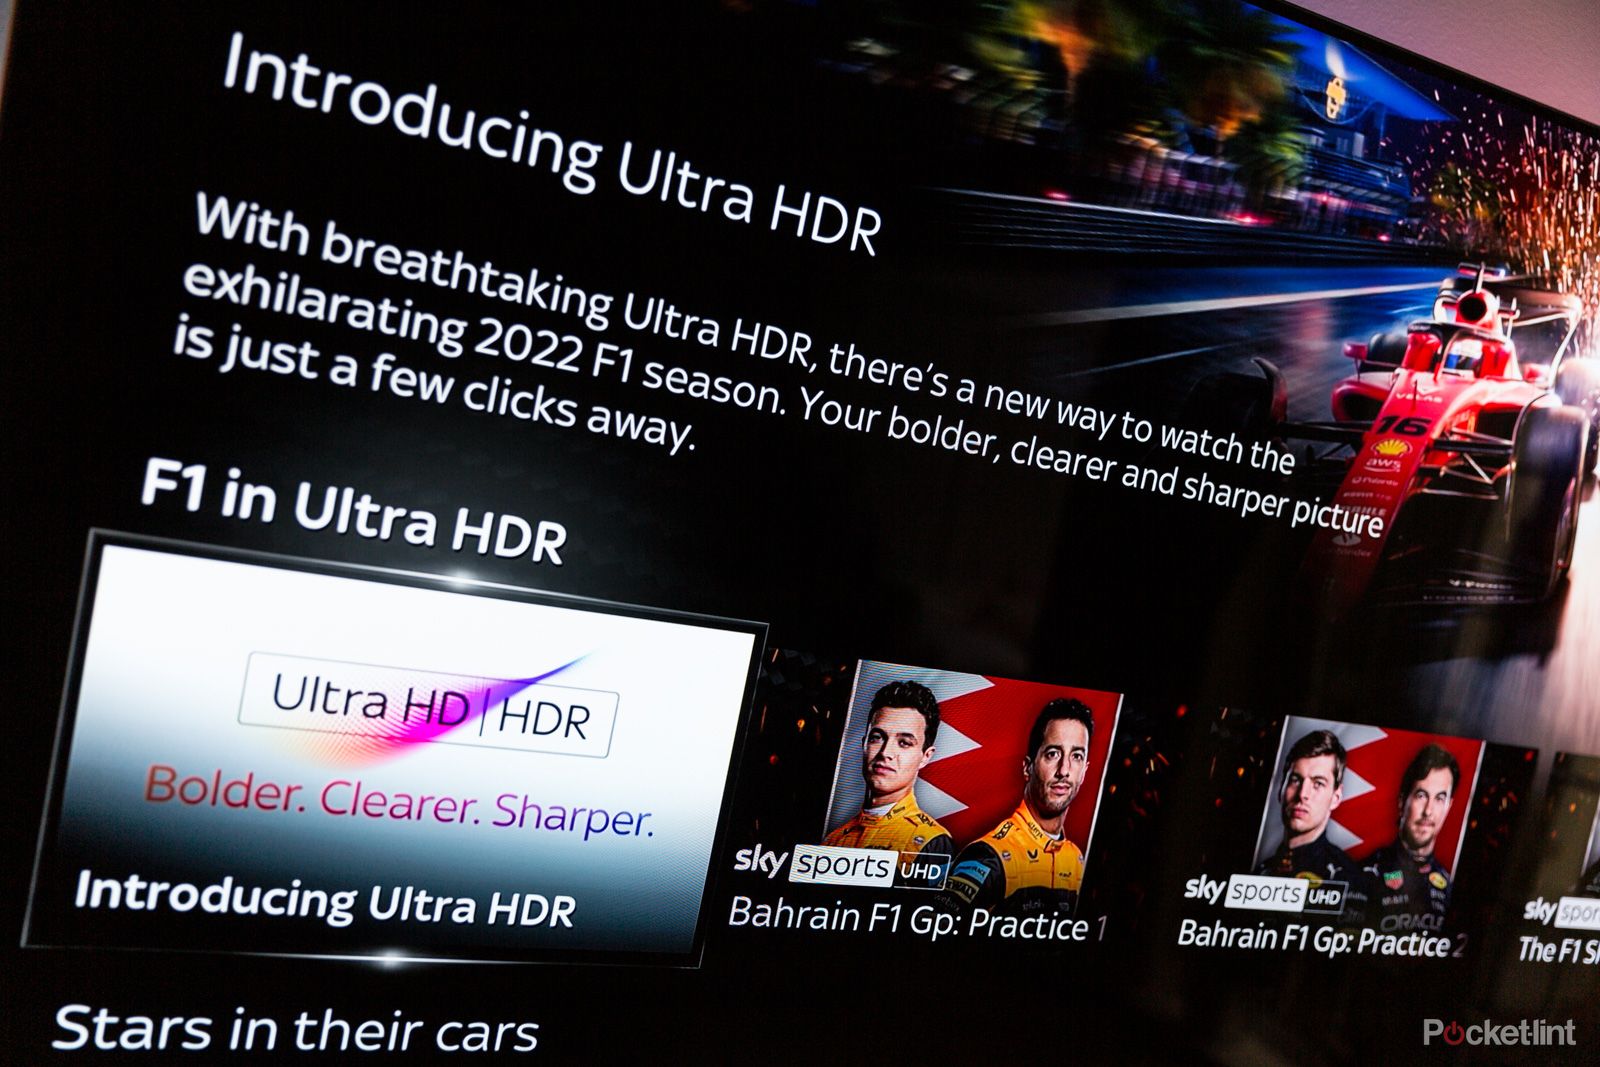 Sky to show F1 in 4K HDR this season, confirmed